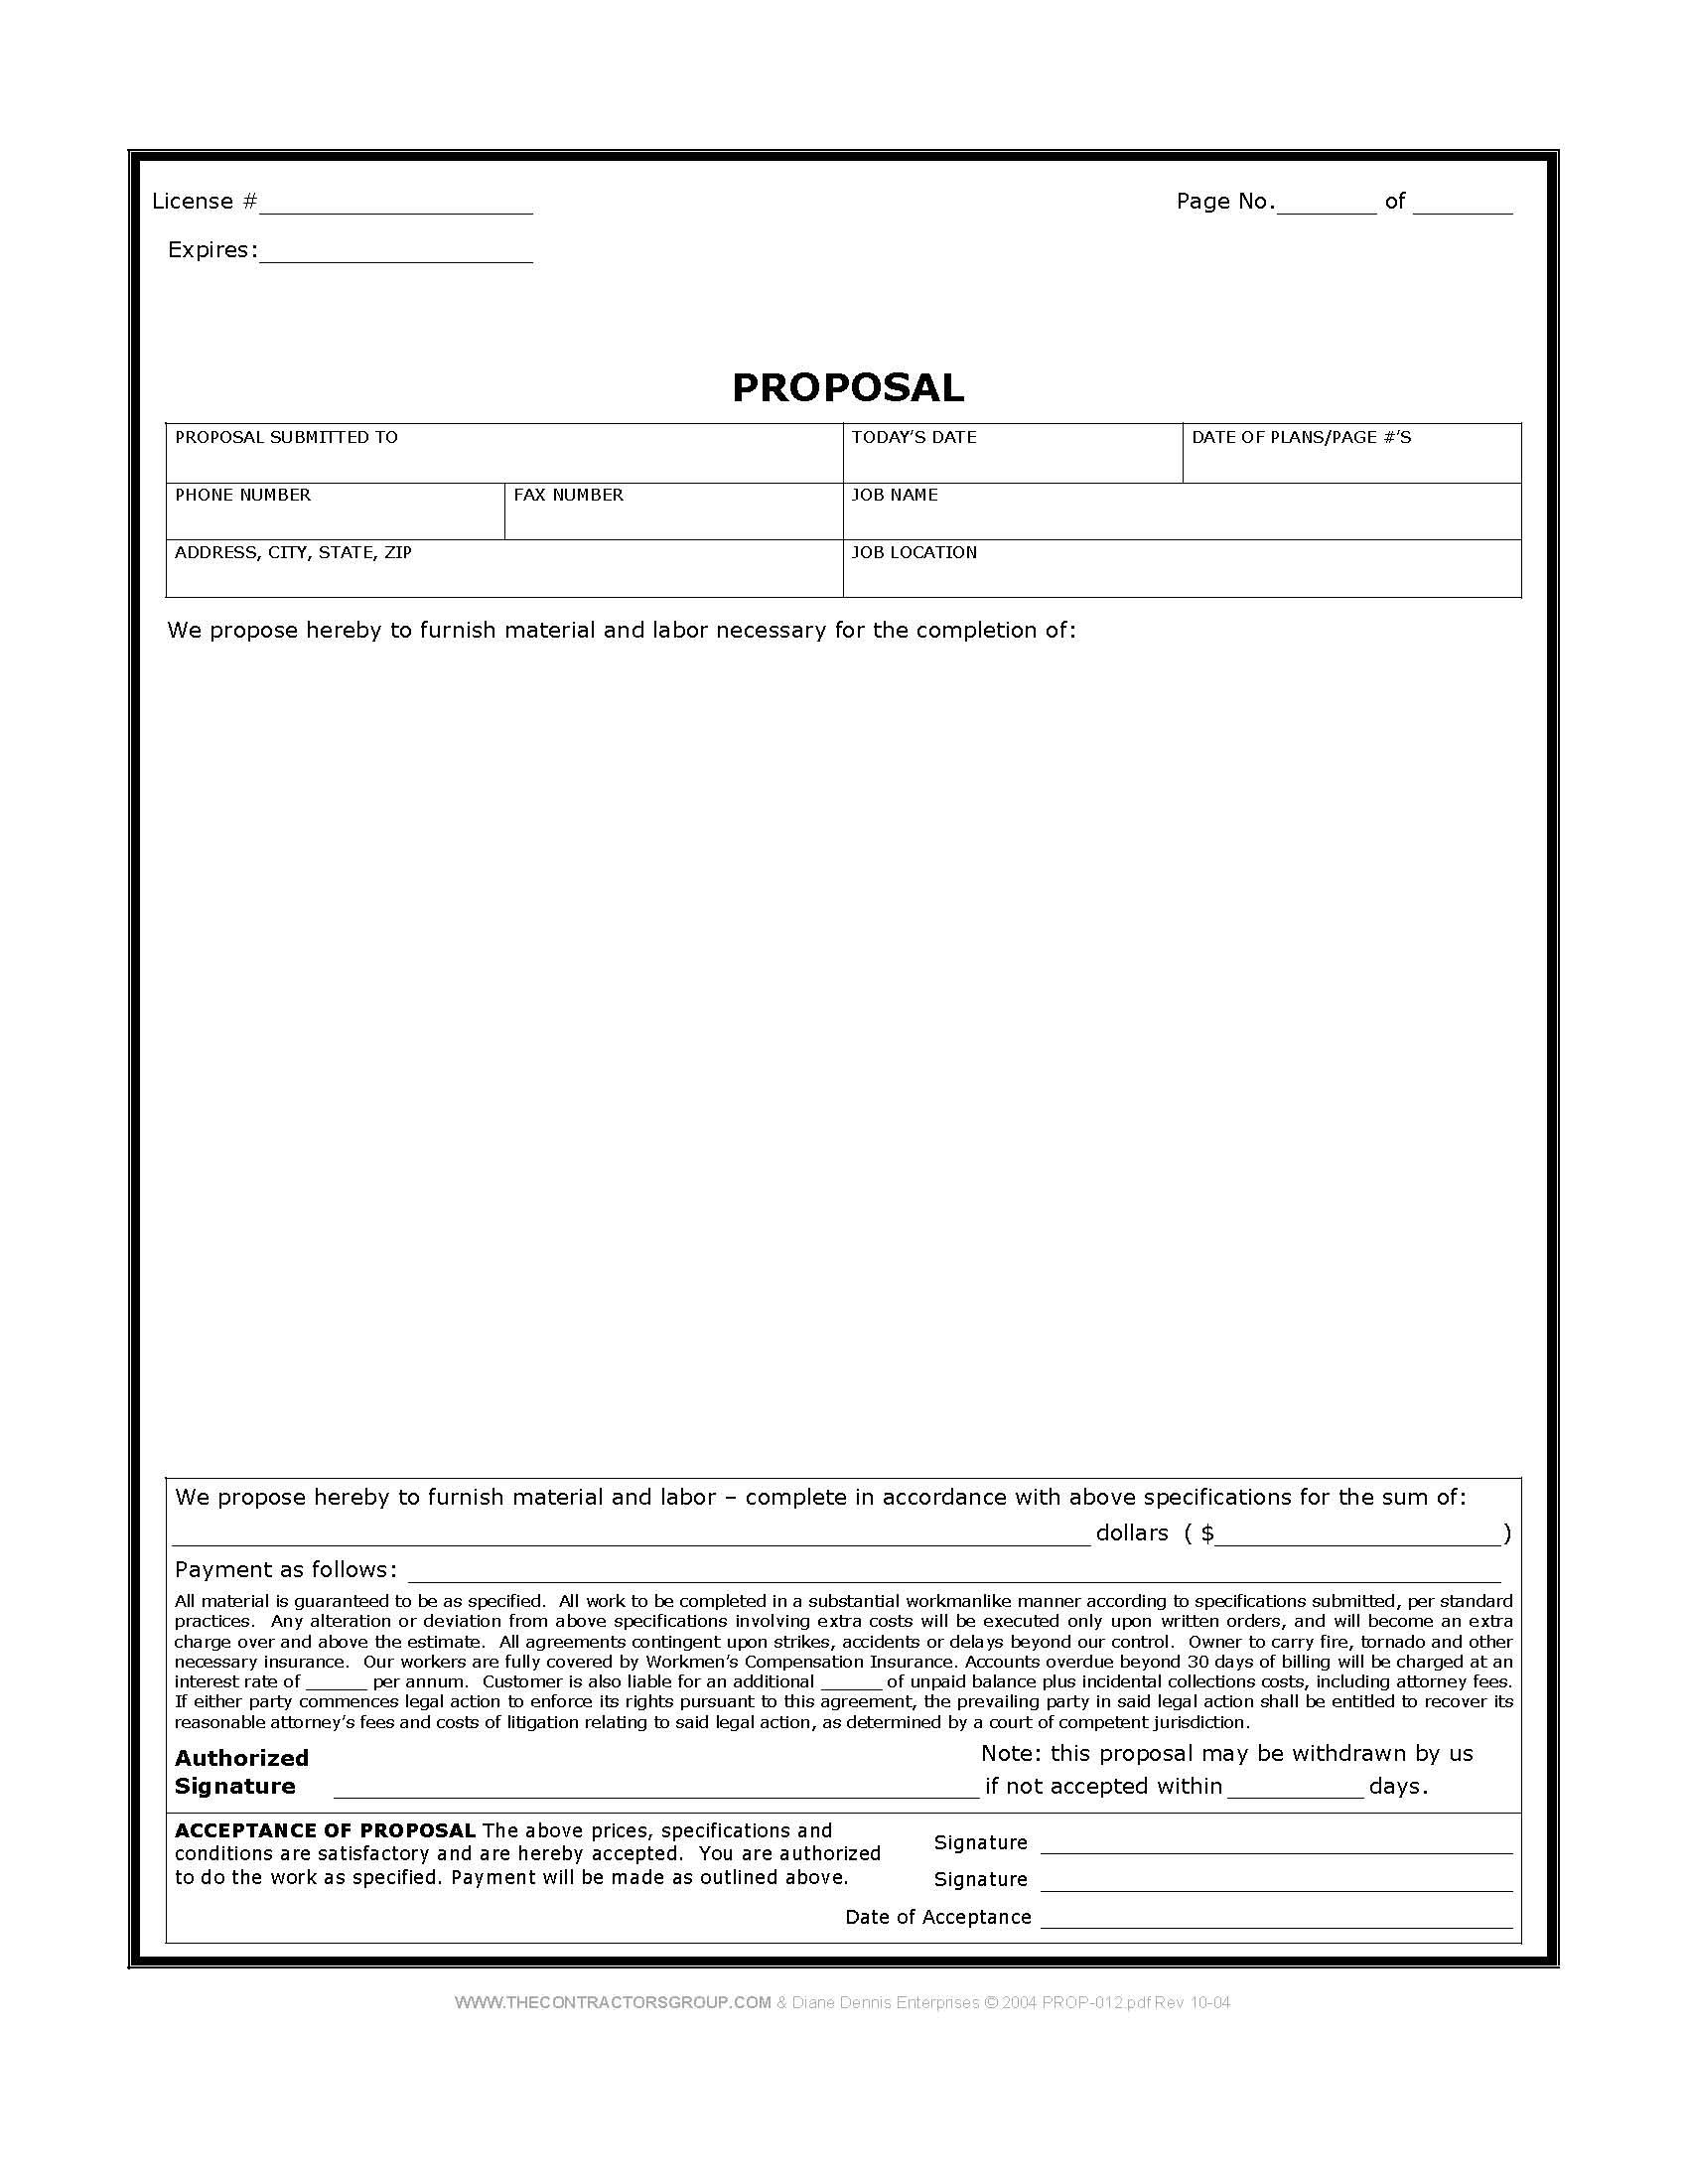 Free Print Contractor Proposal Forms | Construction Proposal Form - Free Printable Proposal Forms